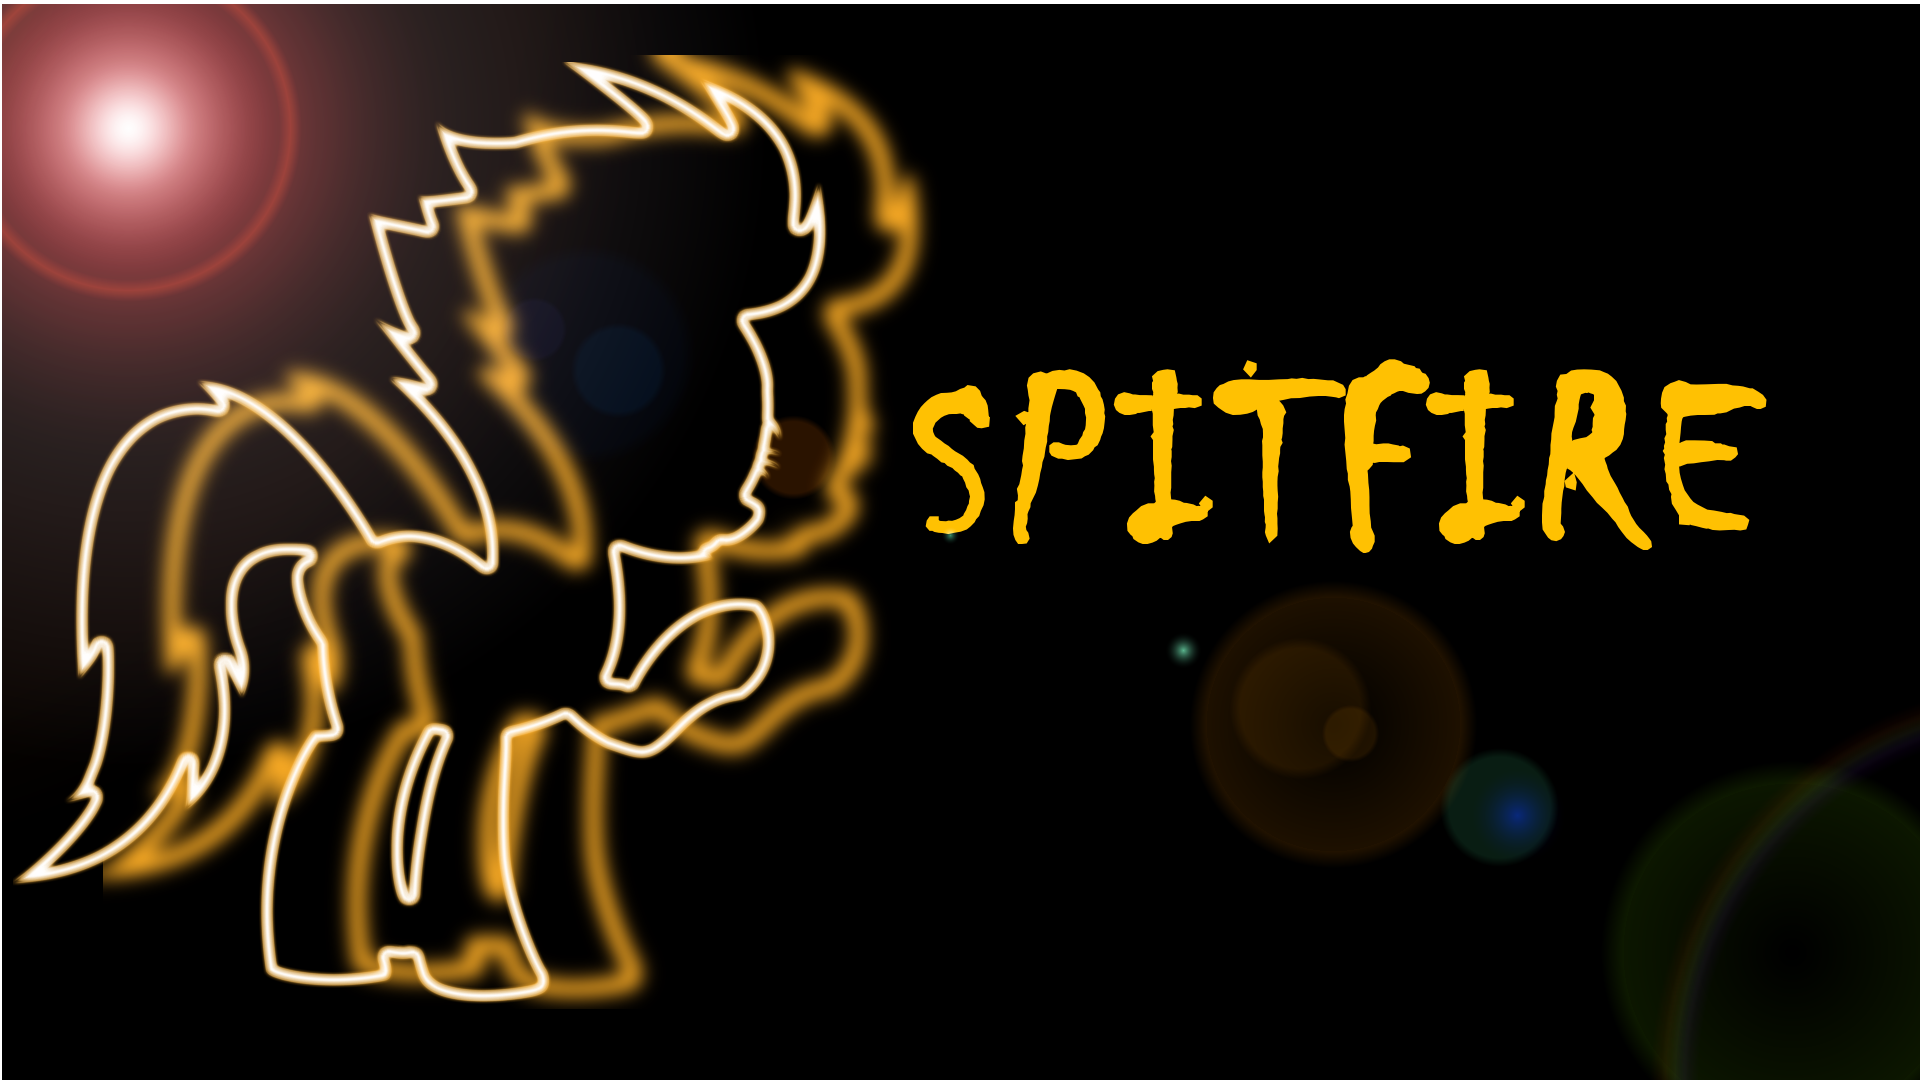 Spitfire neon wallpaper by Sacharapl